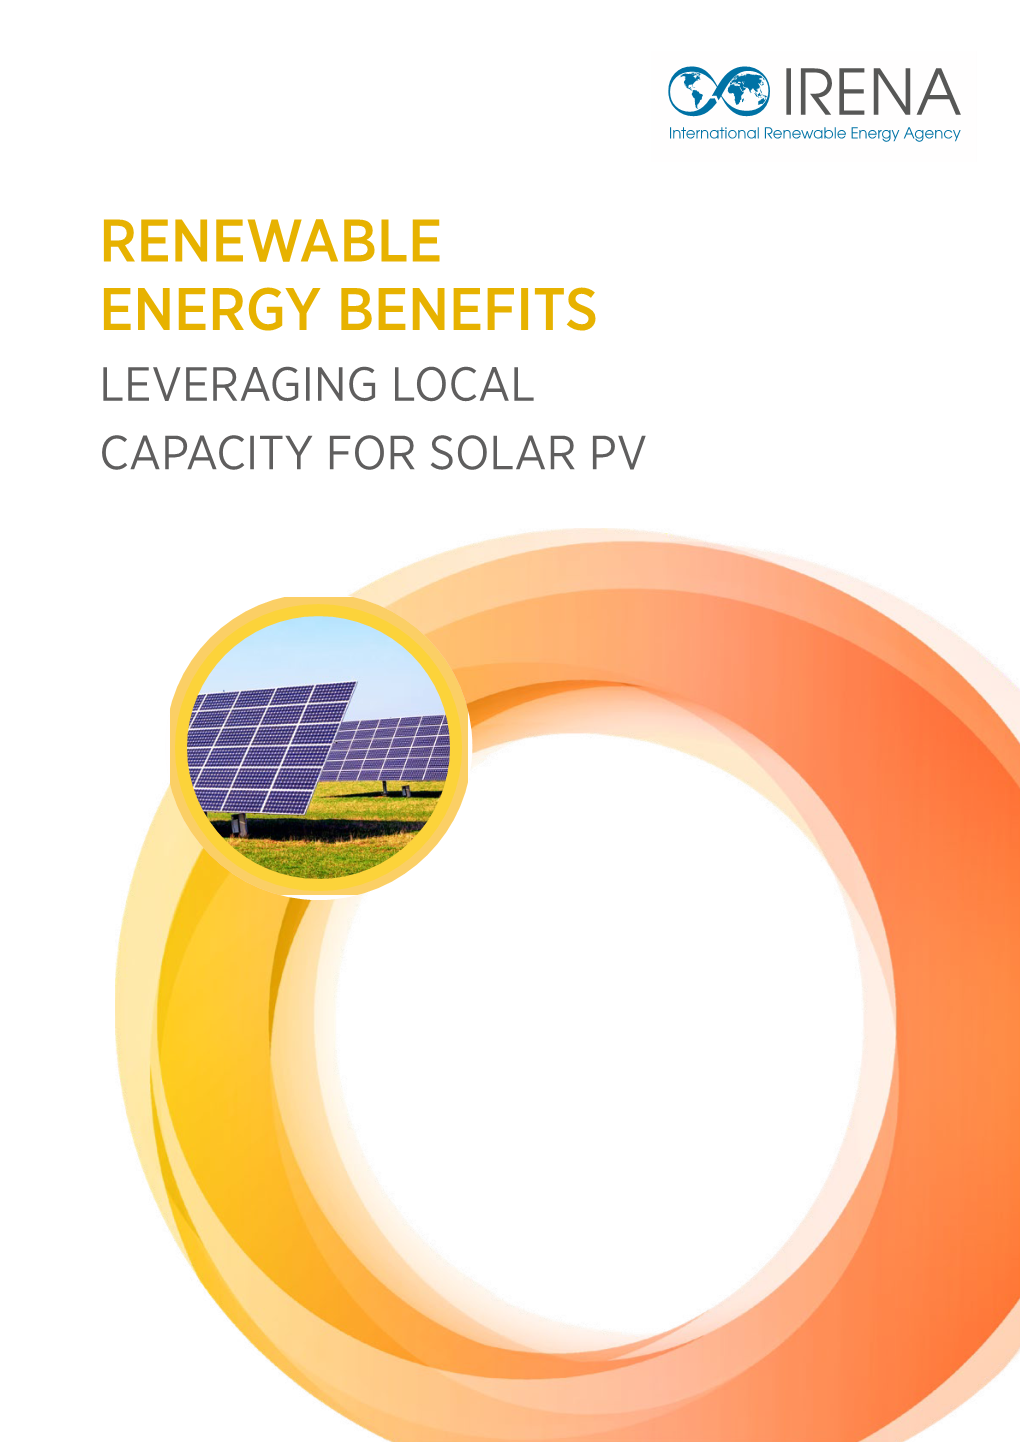 Renewable Energy Benefit: Leveraging Local Capacity for Solar PV